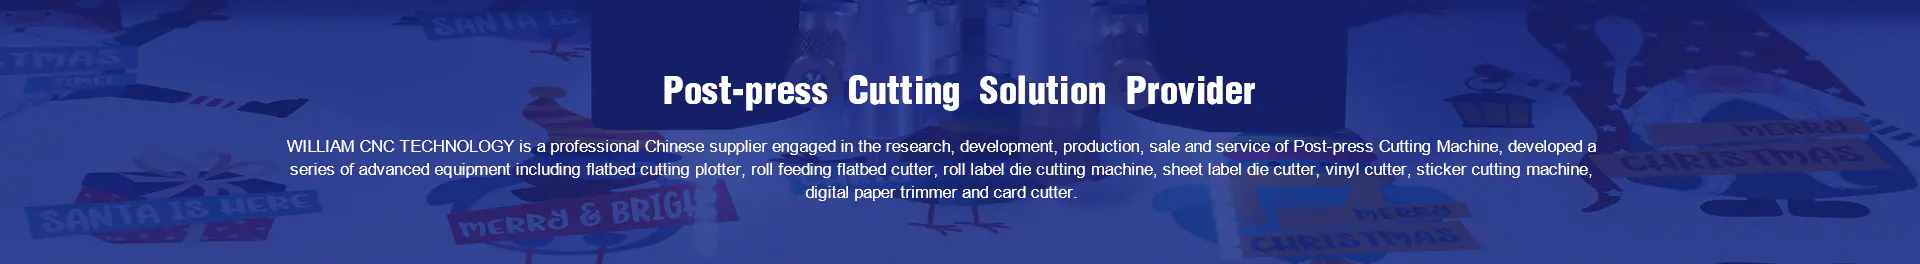 WILLIAM CNC TECHNOLOGY is a professional Chinese supplier engaged in the research, development, production, sale and service of Post-press Cutting Machine, having our own manufacturing base and official license for export & import business.